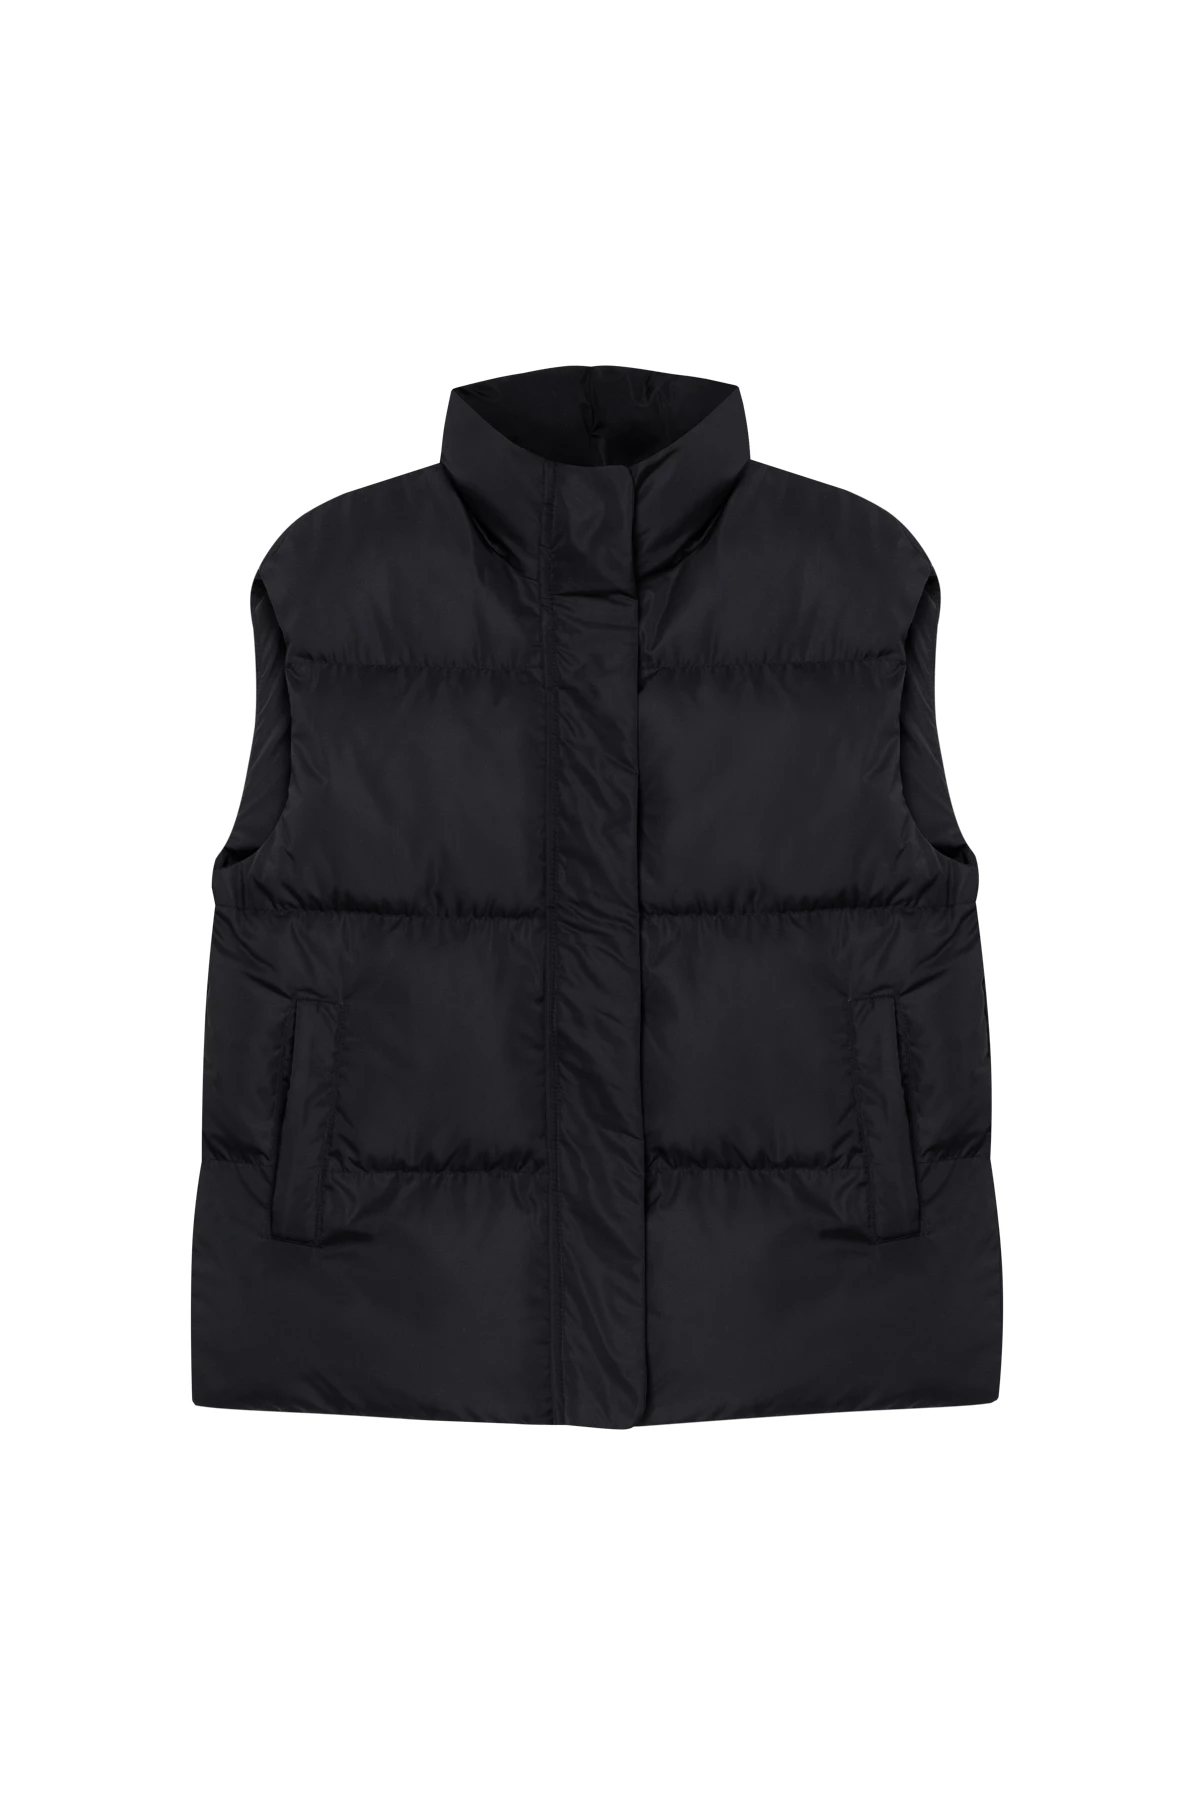 Black quilted padded vest, photo 7